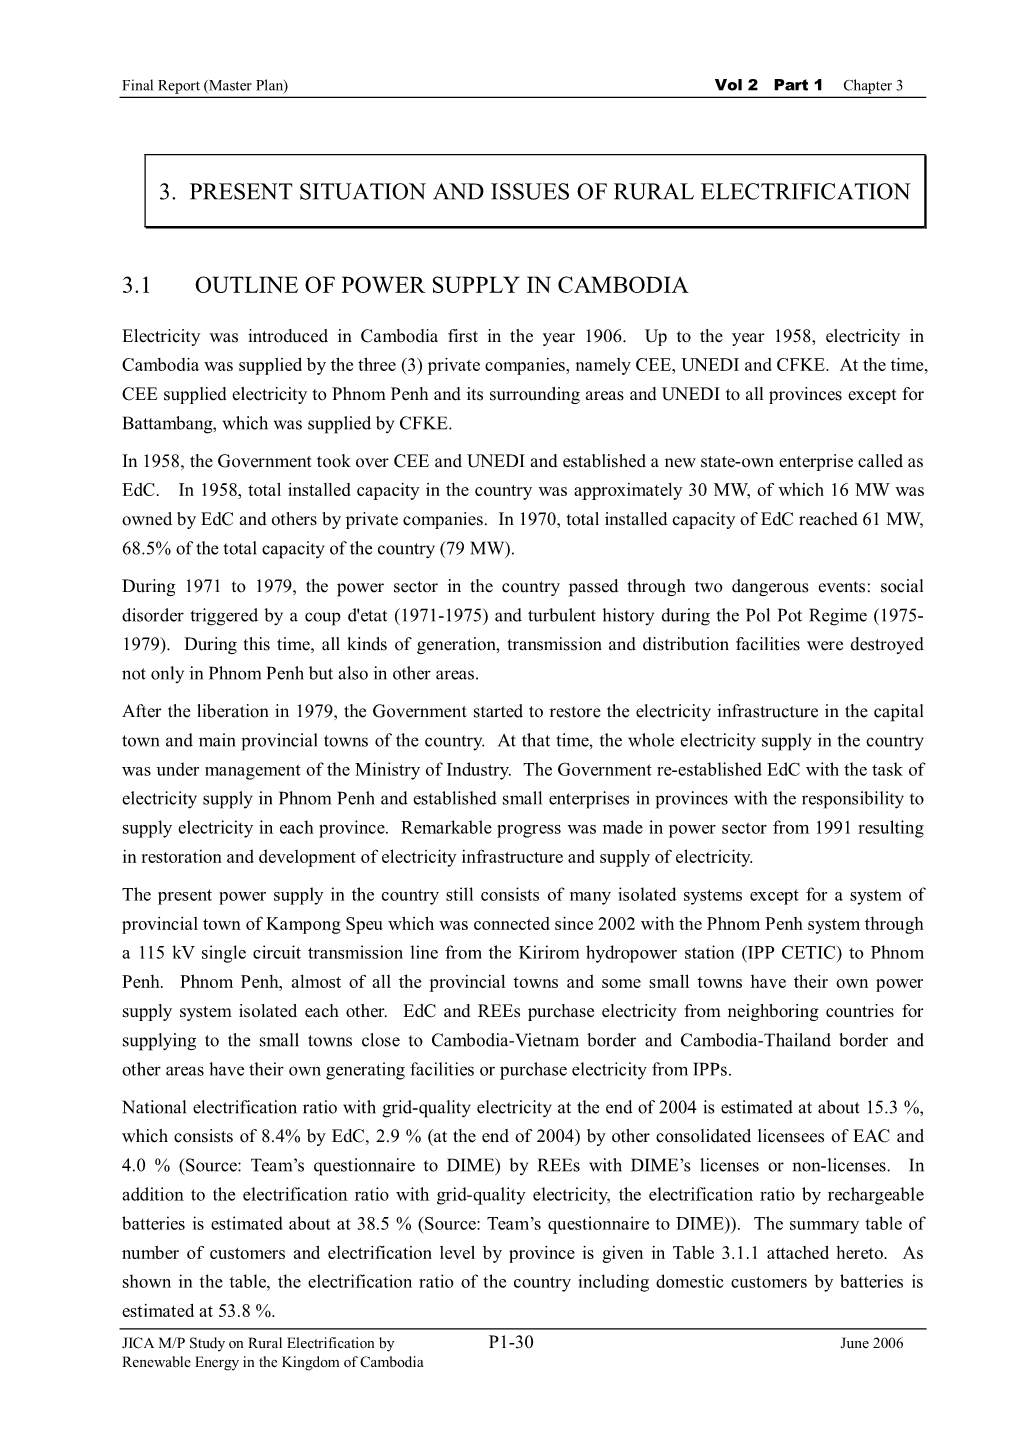 3. Present Situation and Issues of Rural Electrification